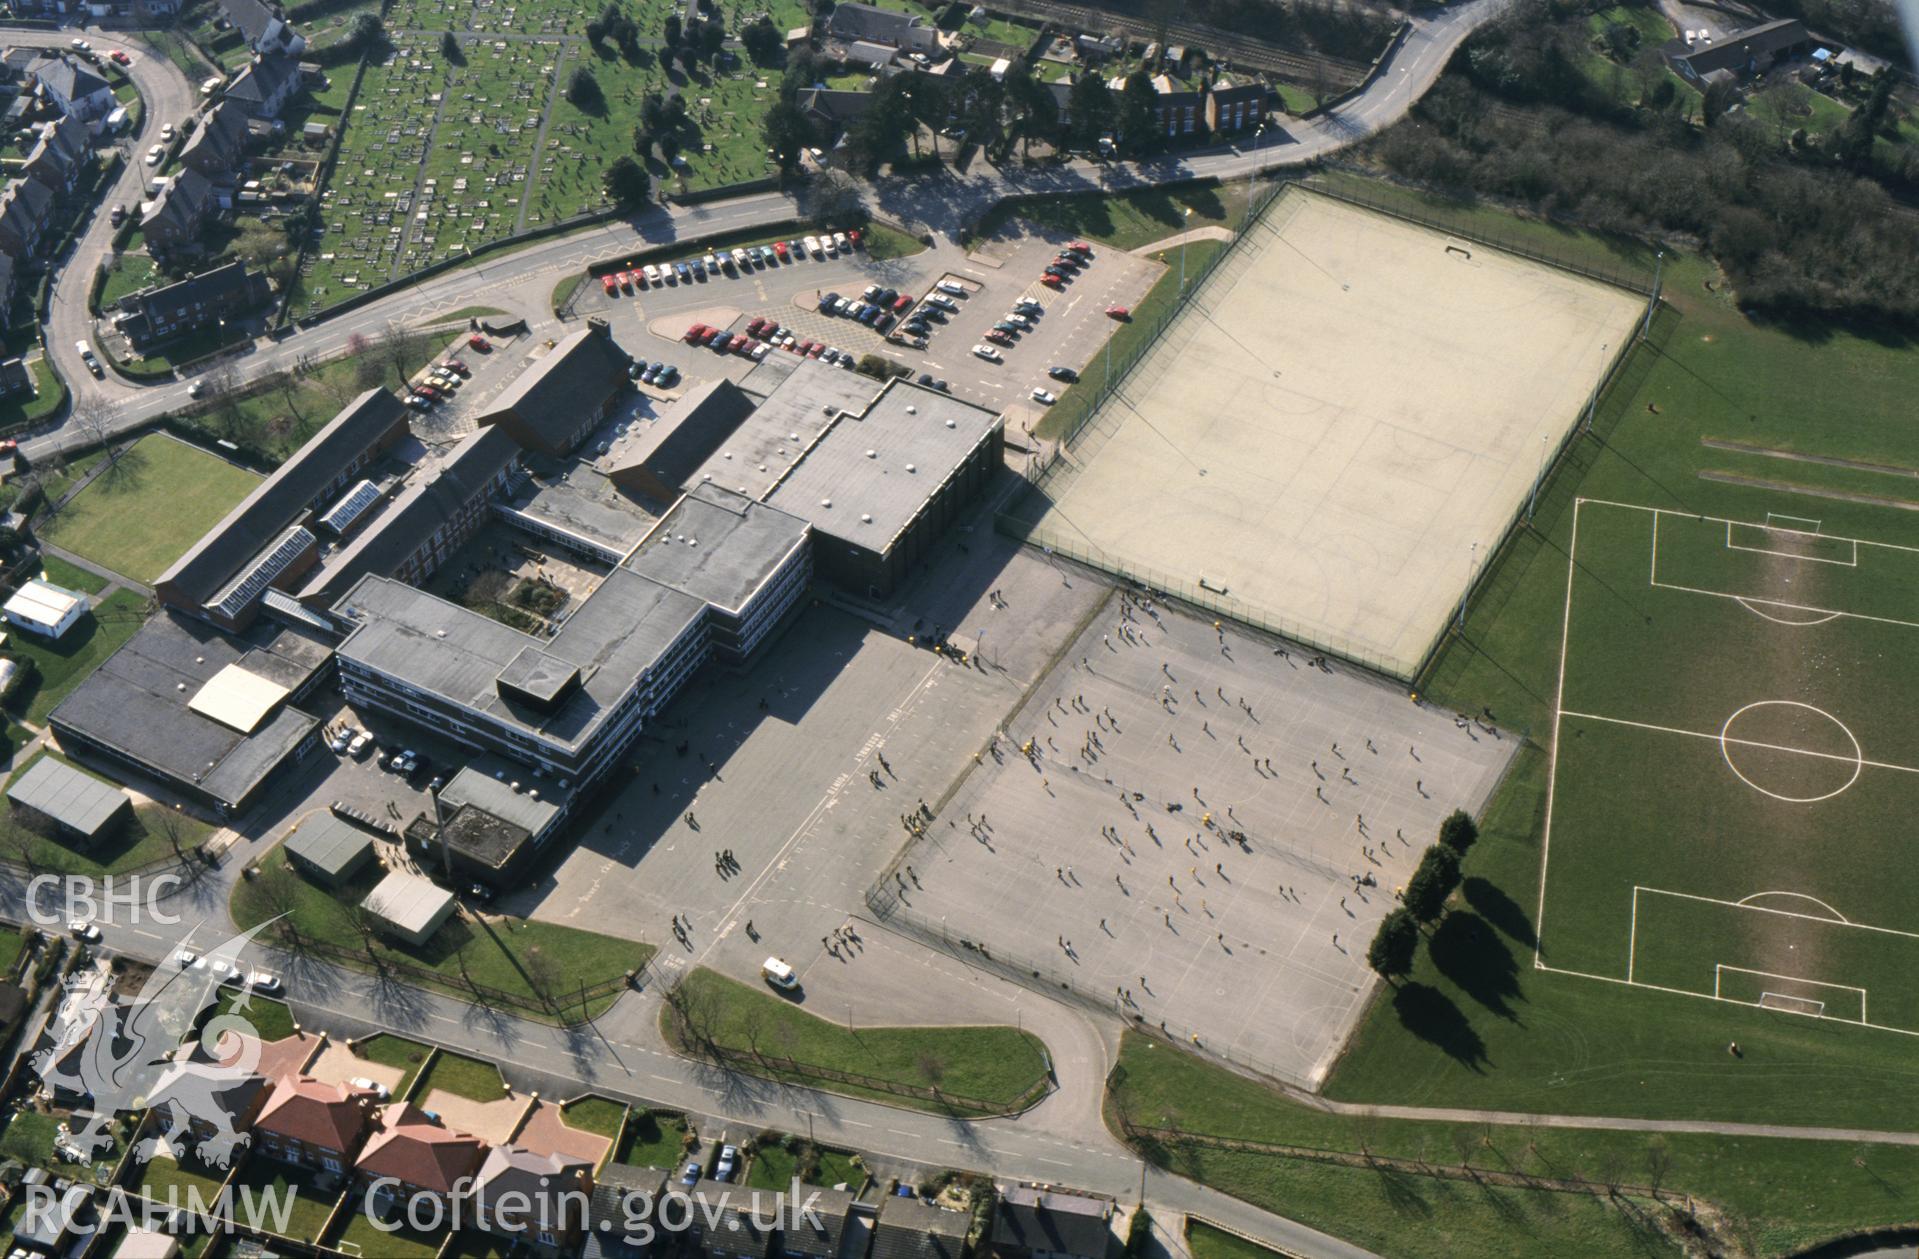 RCAHMW colour oblique aerial photograph of Castell Alun High School. Taken by Toby Driver on 14/03/2003